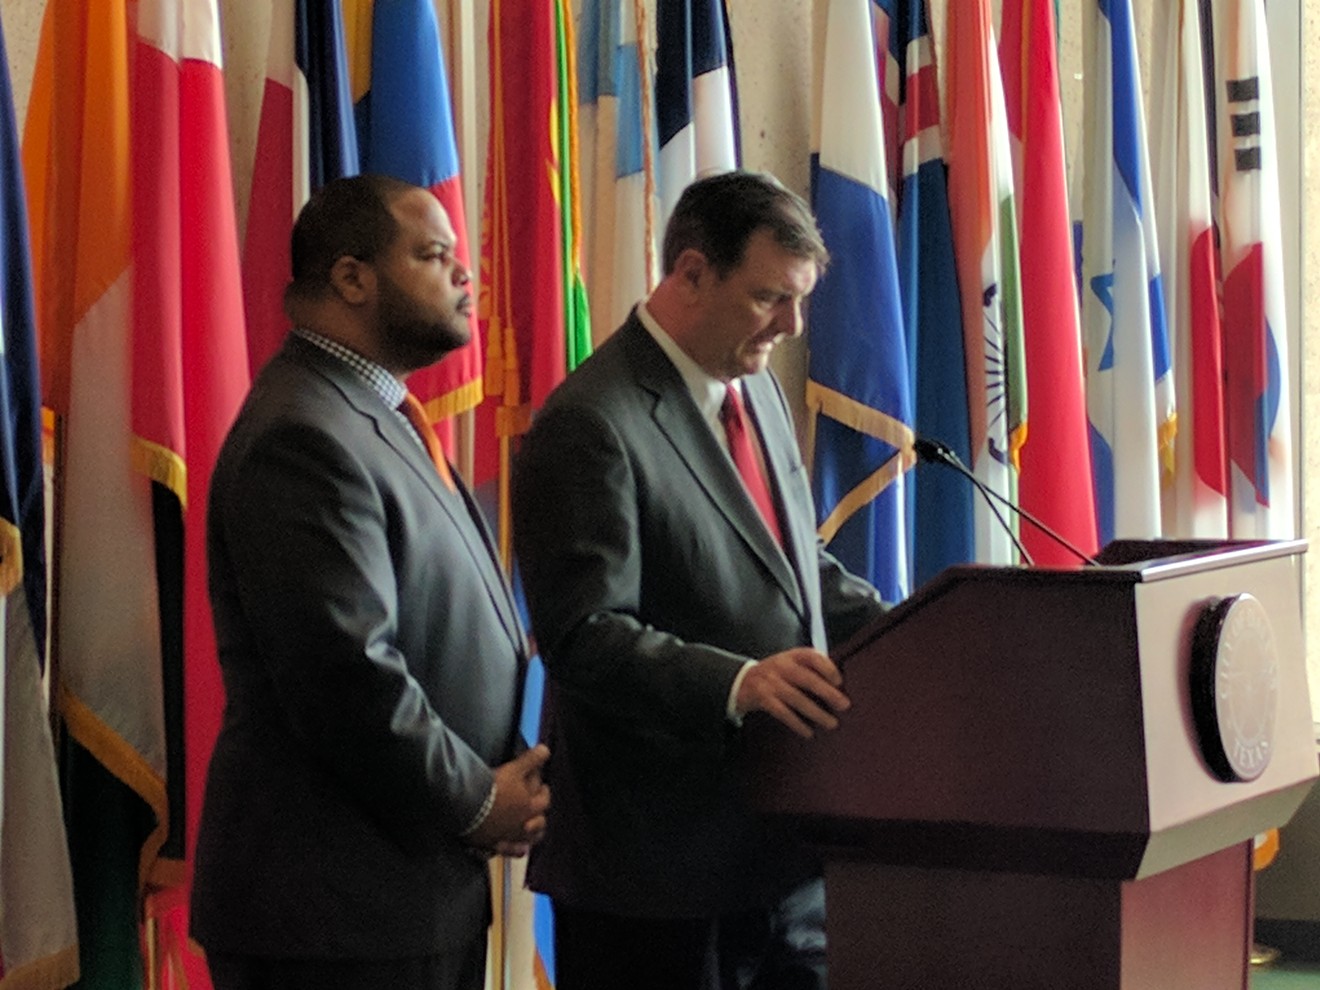 Eric Johnson (left) and Mike Rawlings at Dallas City Hall decrying potential voter fraud in April.